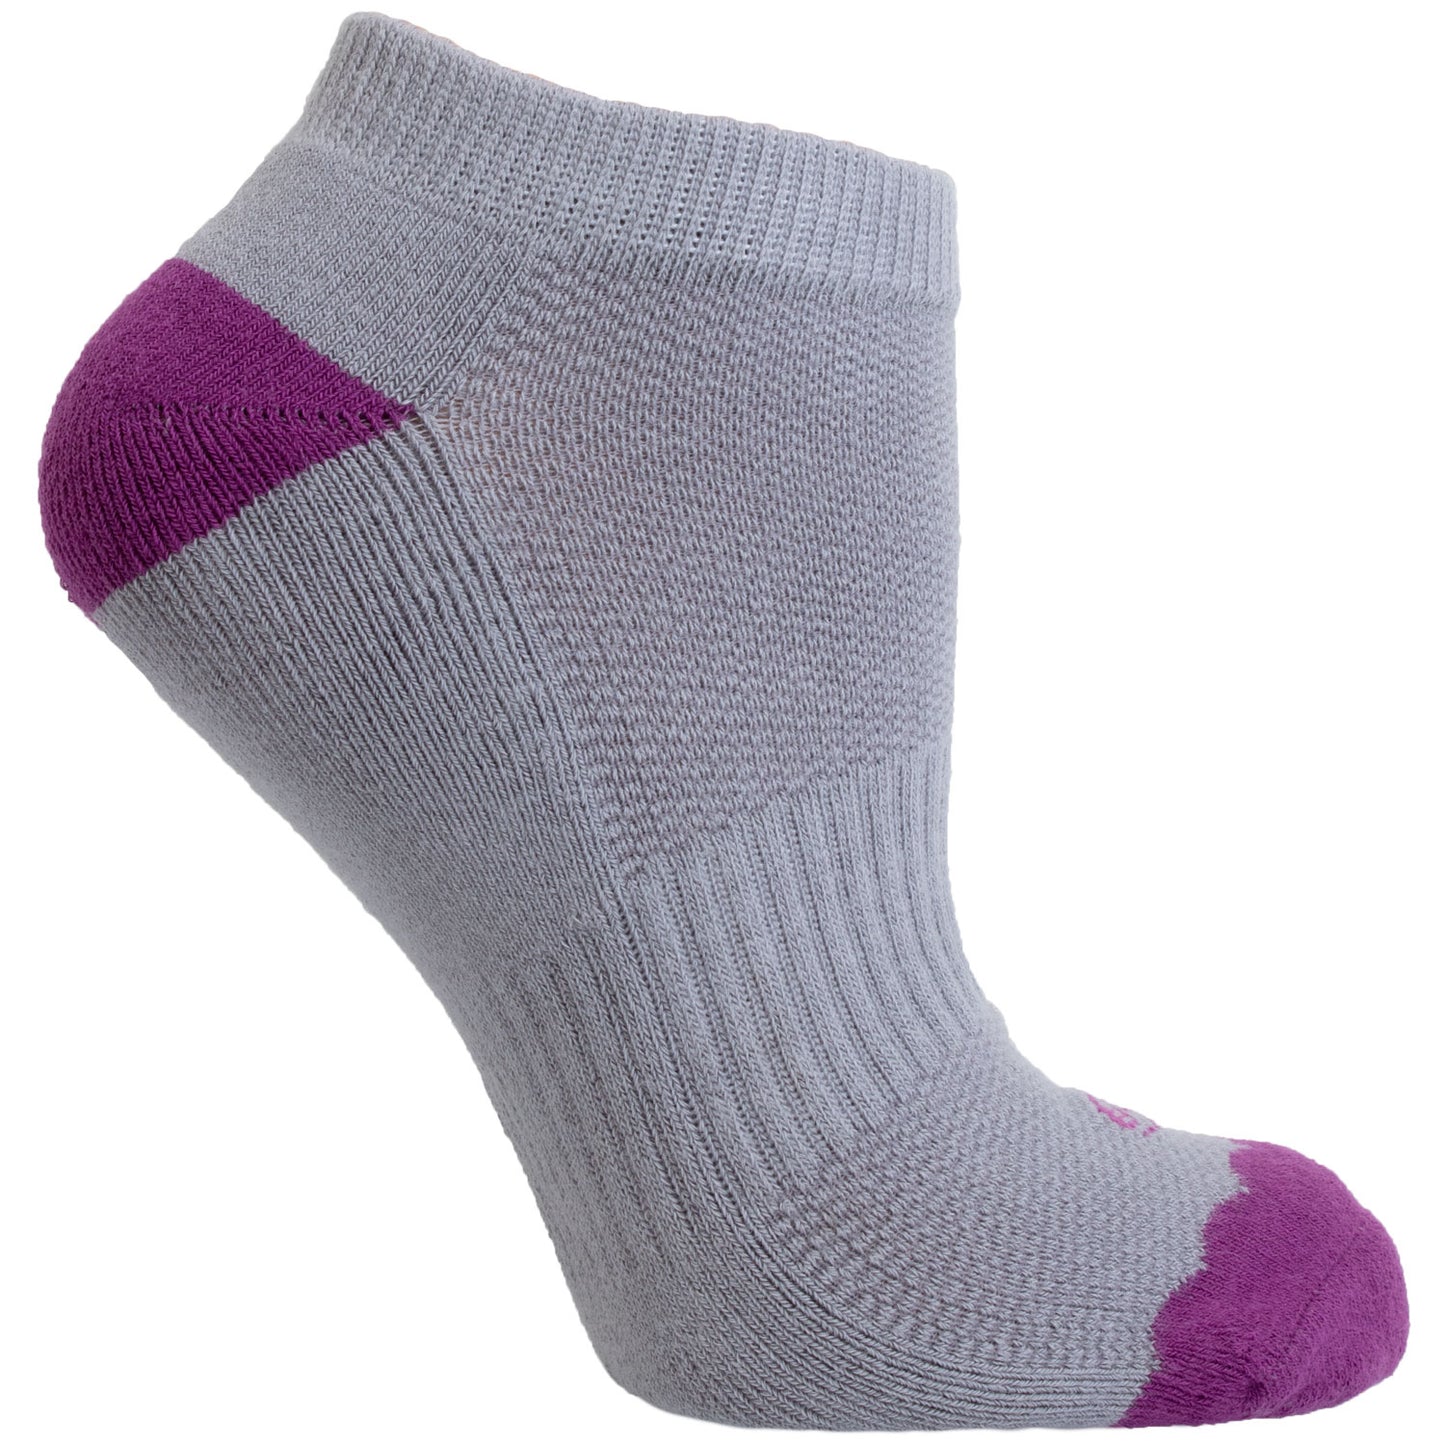 Scalloped No Show Performance Sock - 3 Pack